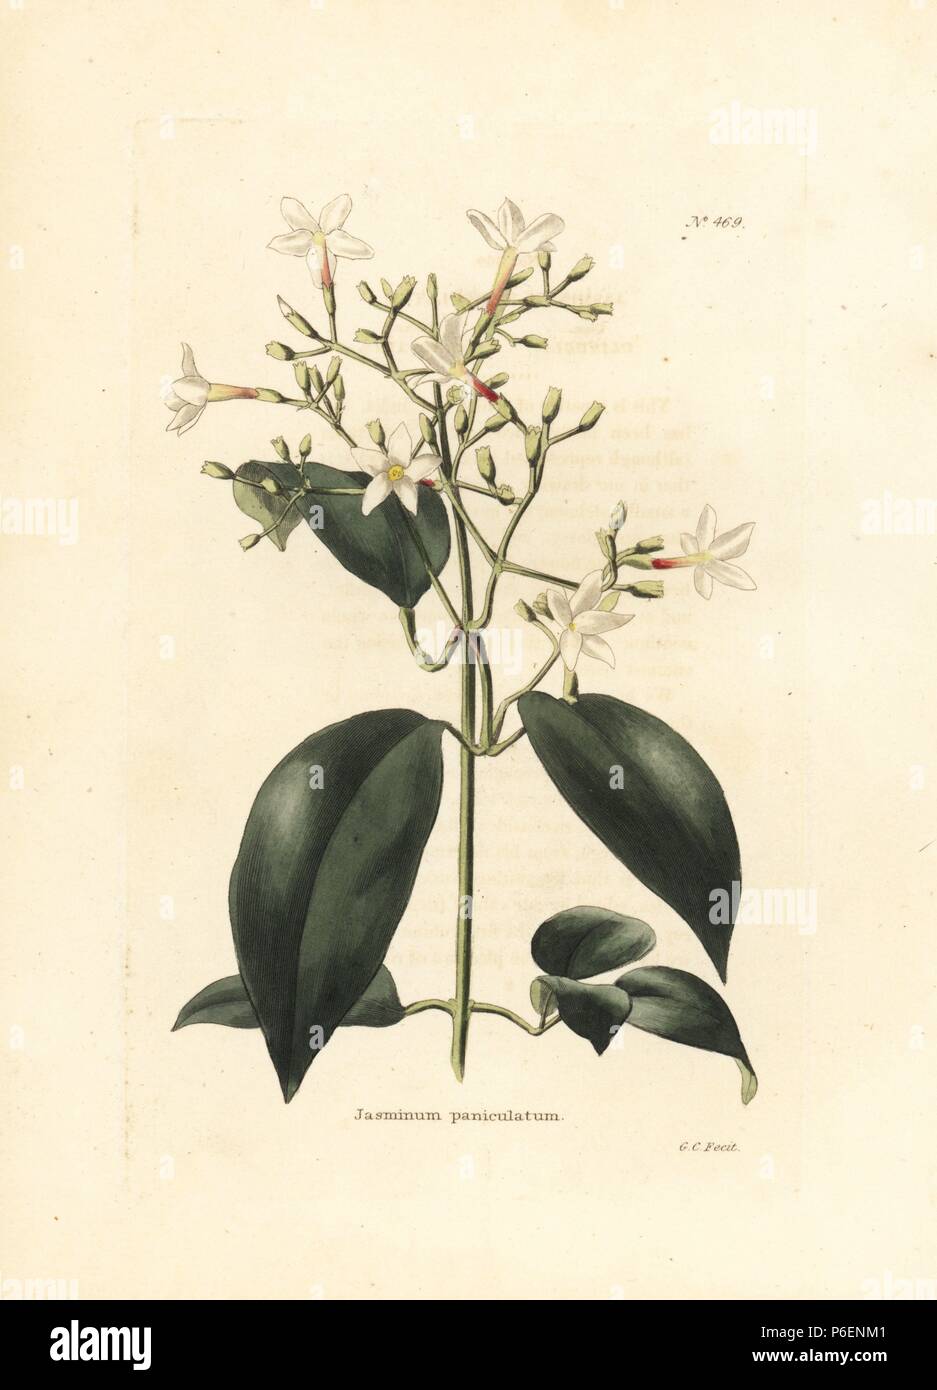 Jasminum lanceolaria. Handcoloured copperplate engraving by George Cooke from Conrad Loddiges' Botanical Cabinet, London, 1810. Stock Photo